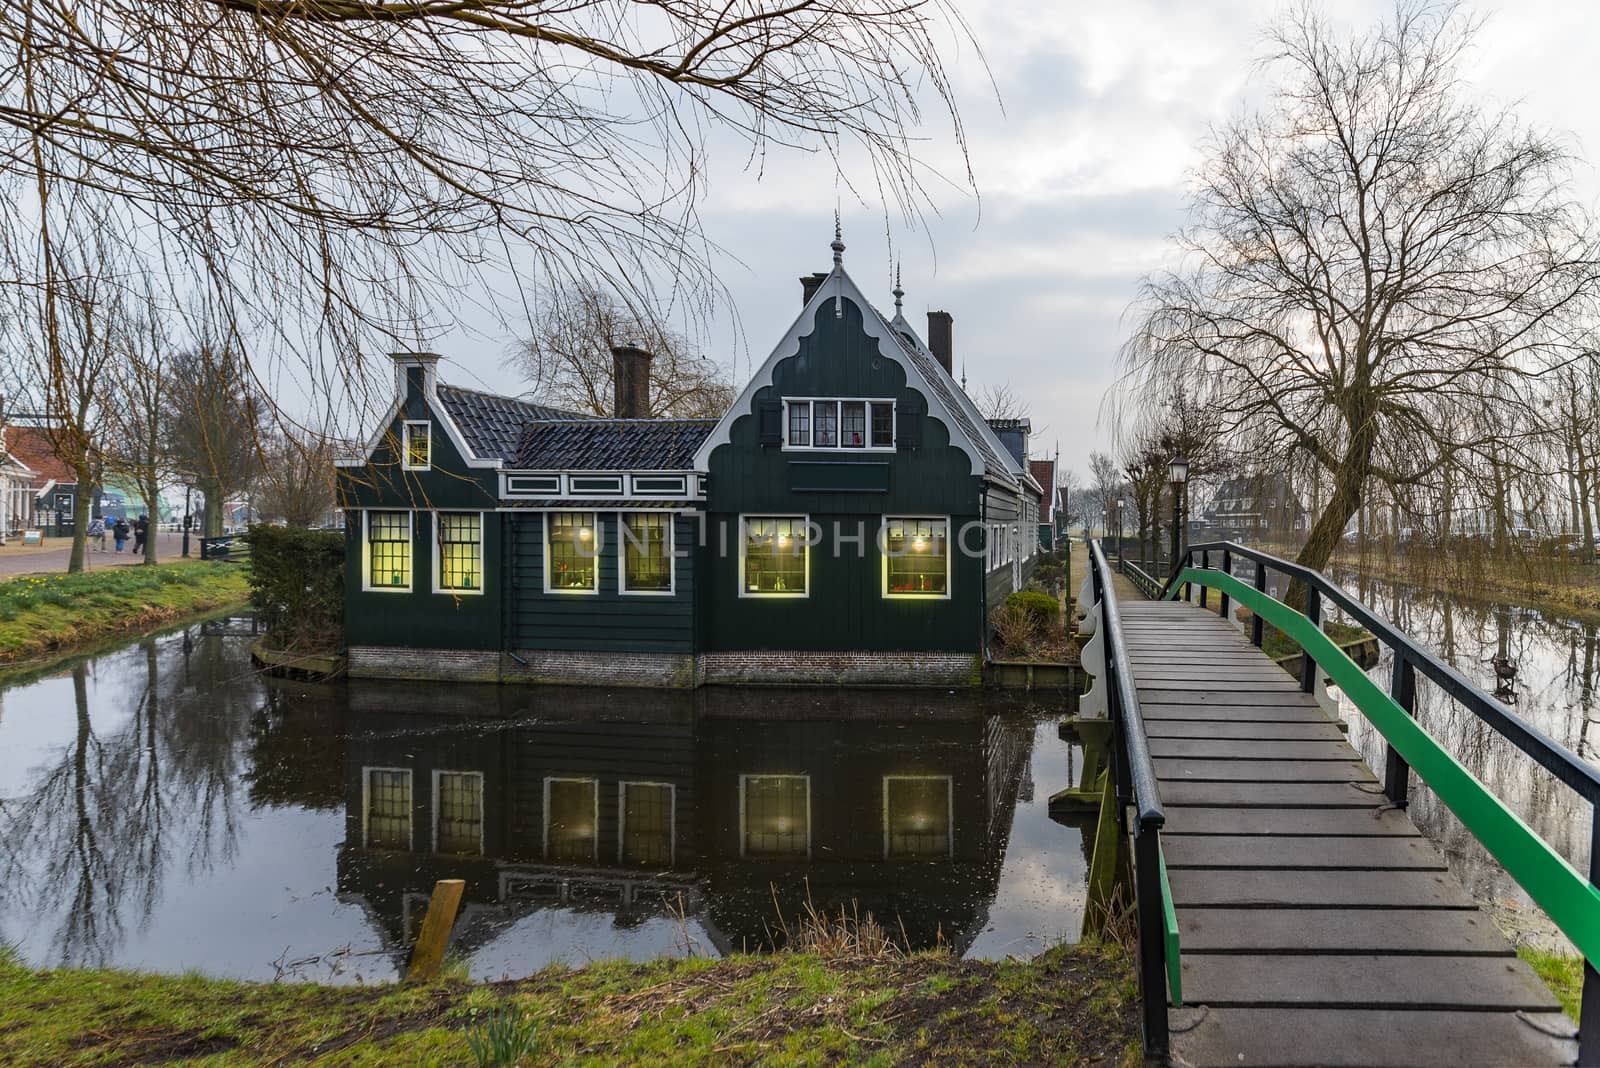 Beautiful and typical Dutch wooden houses architecture mirrored on the calm canal of Zaanse Schans located at the North of Amsterdam, Netherlands by ankorlight